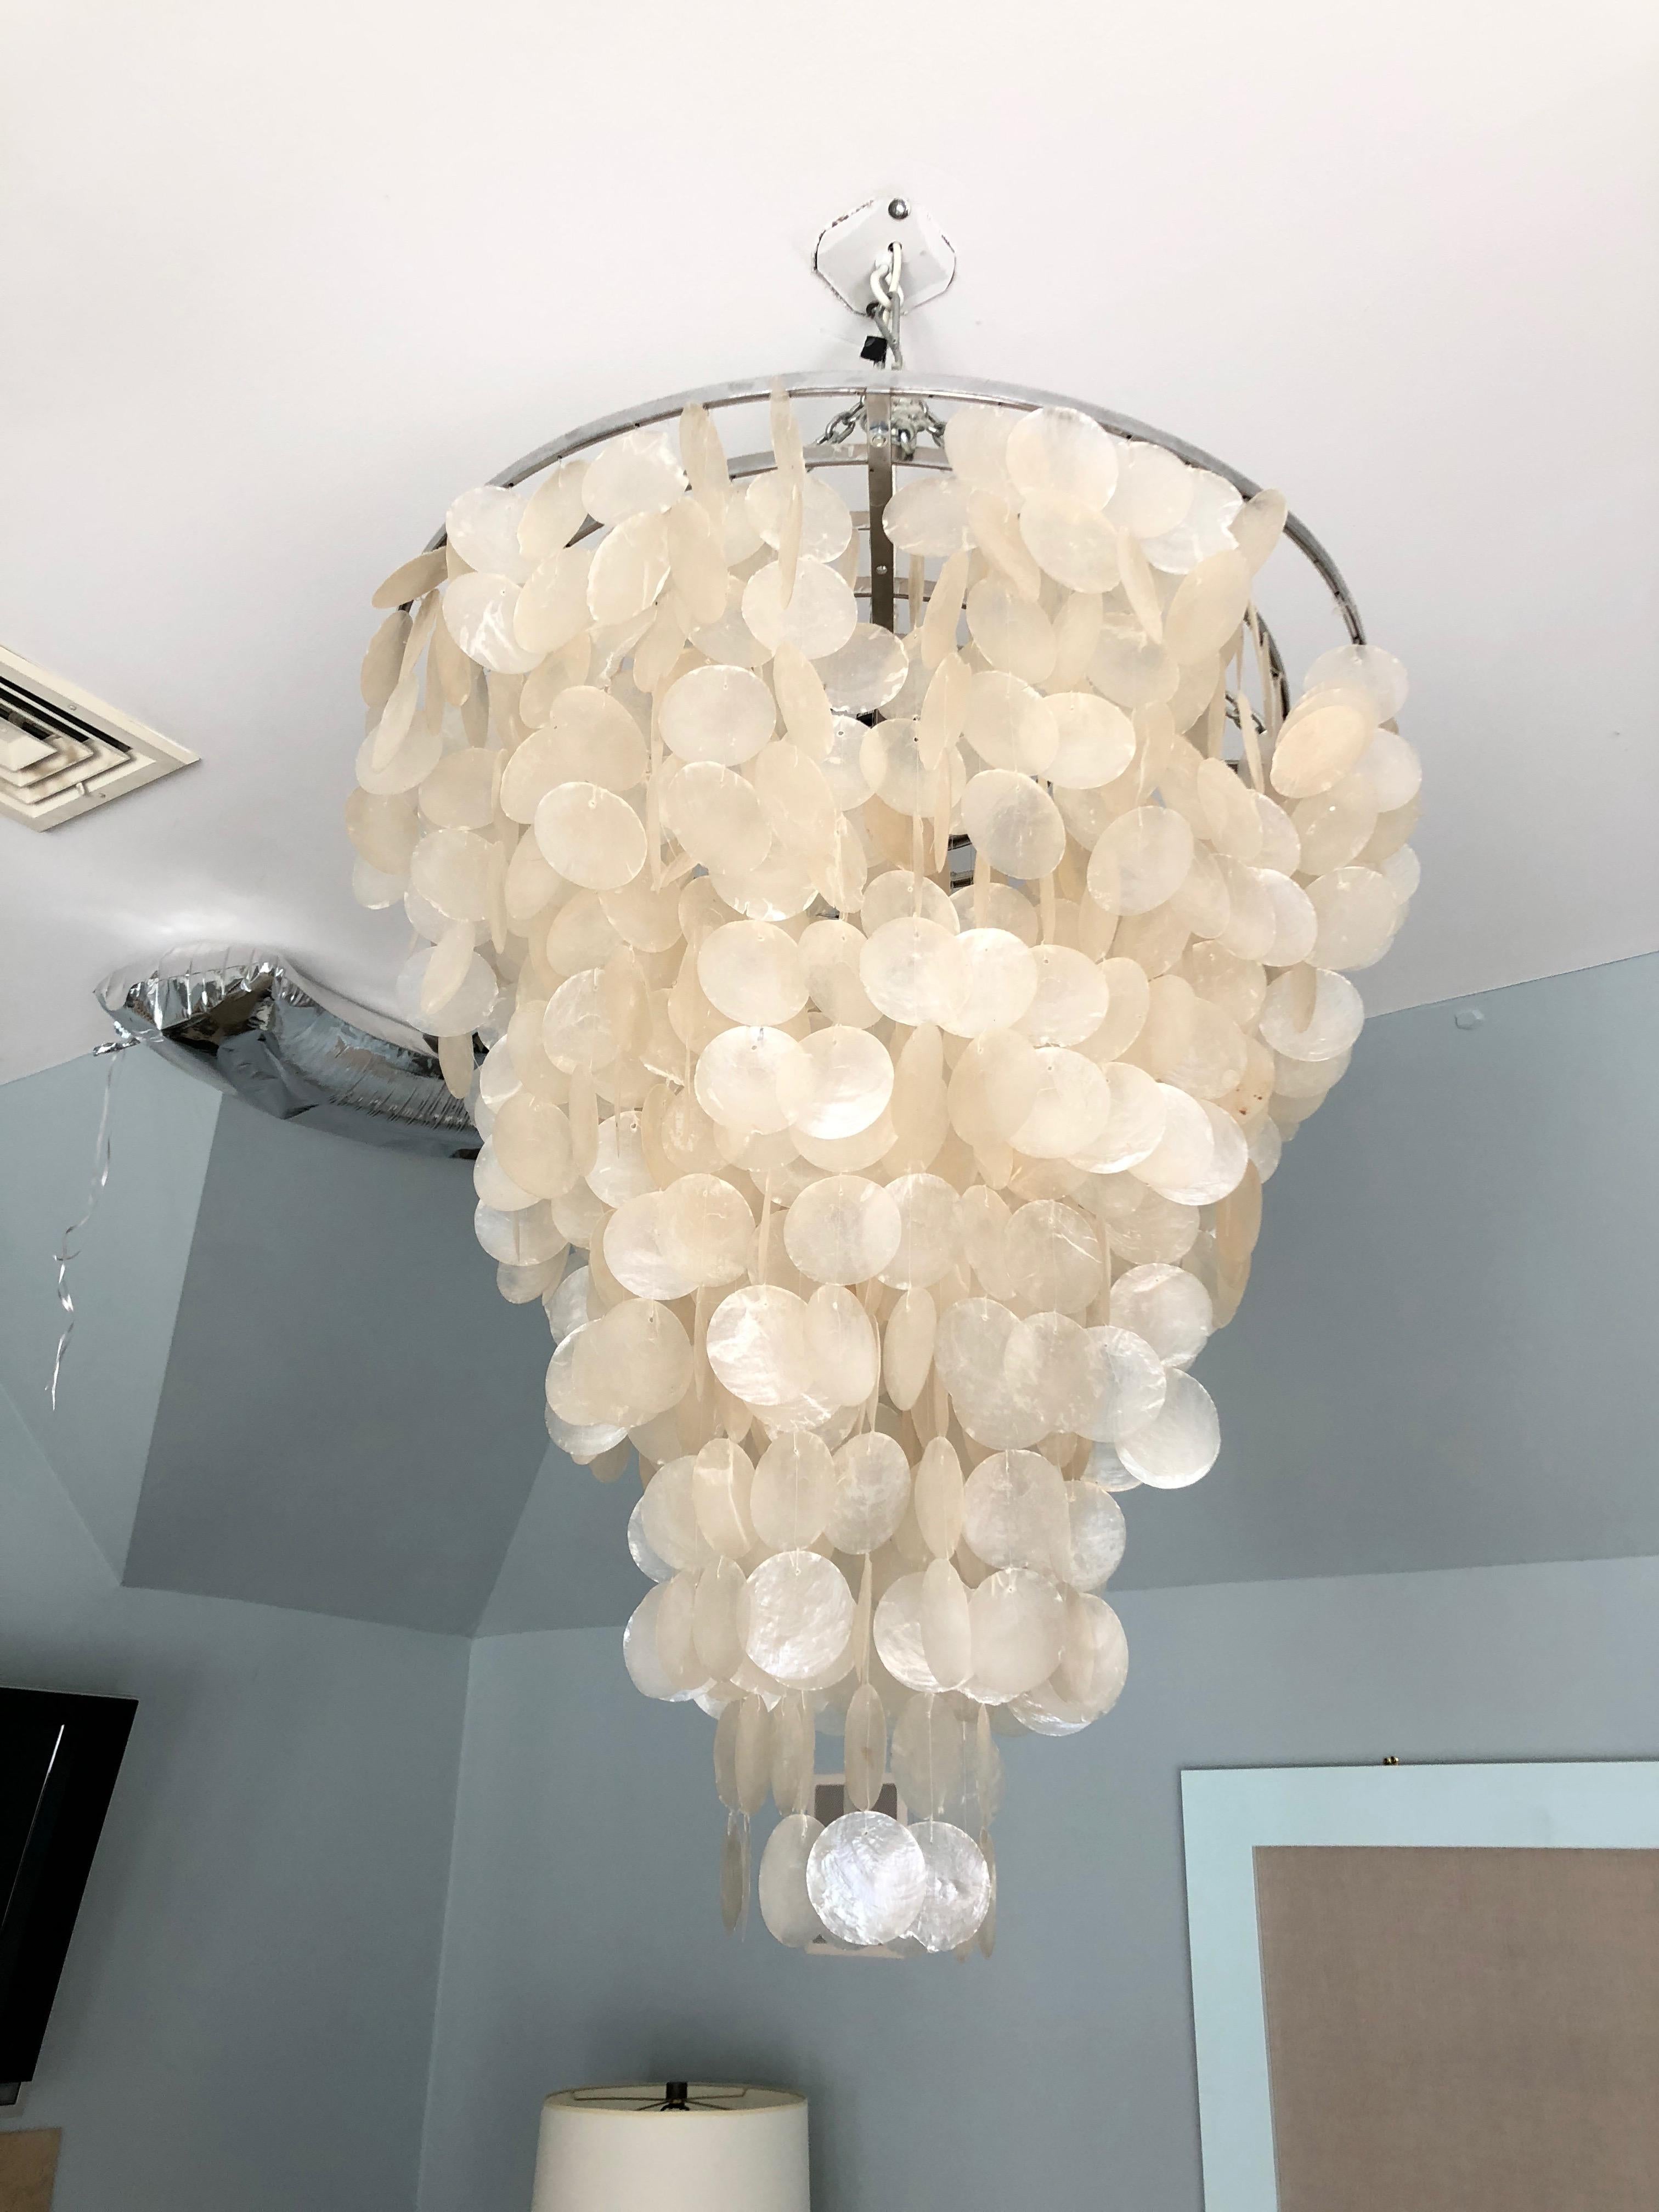 Iconic design of cascading layers of shell in a monumental size.
Drop from ceiling to top of fixture is 17.5.